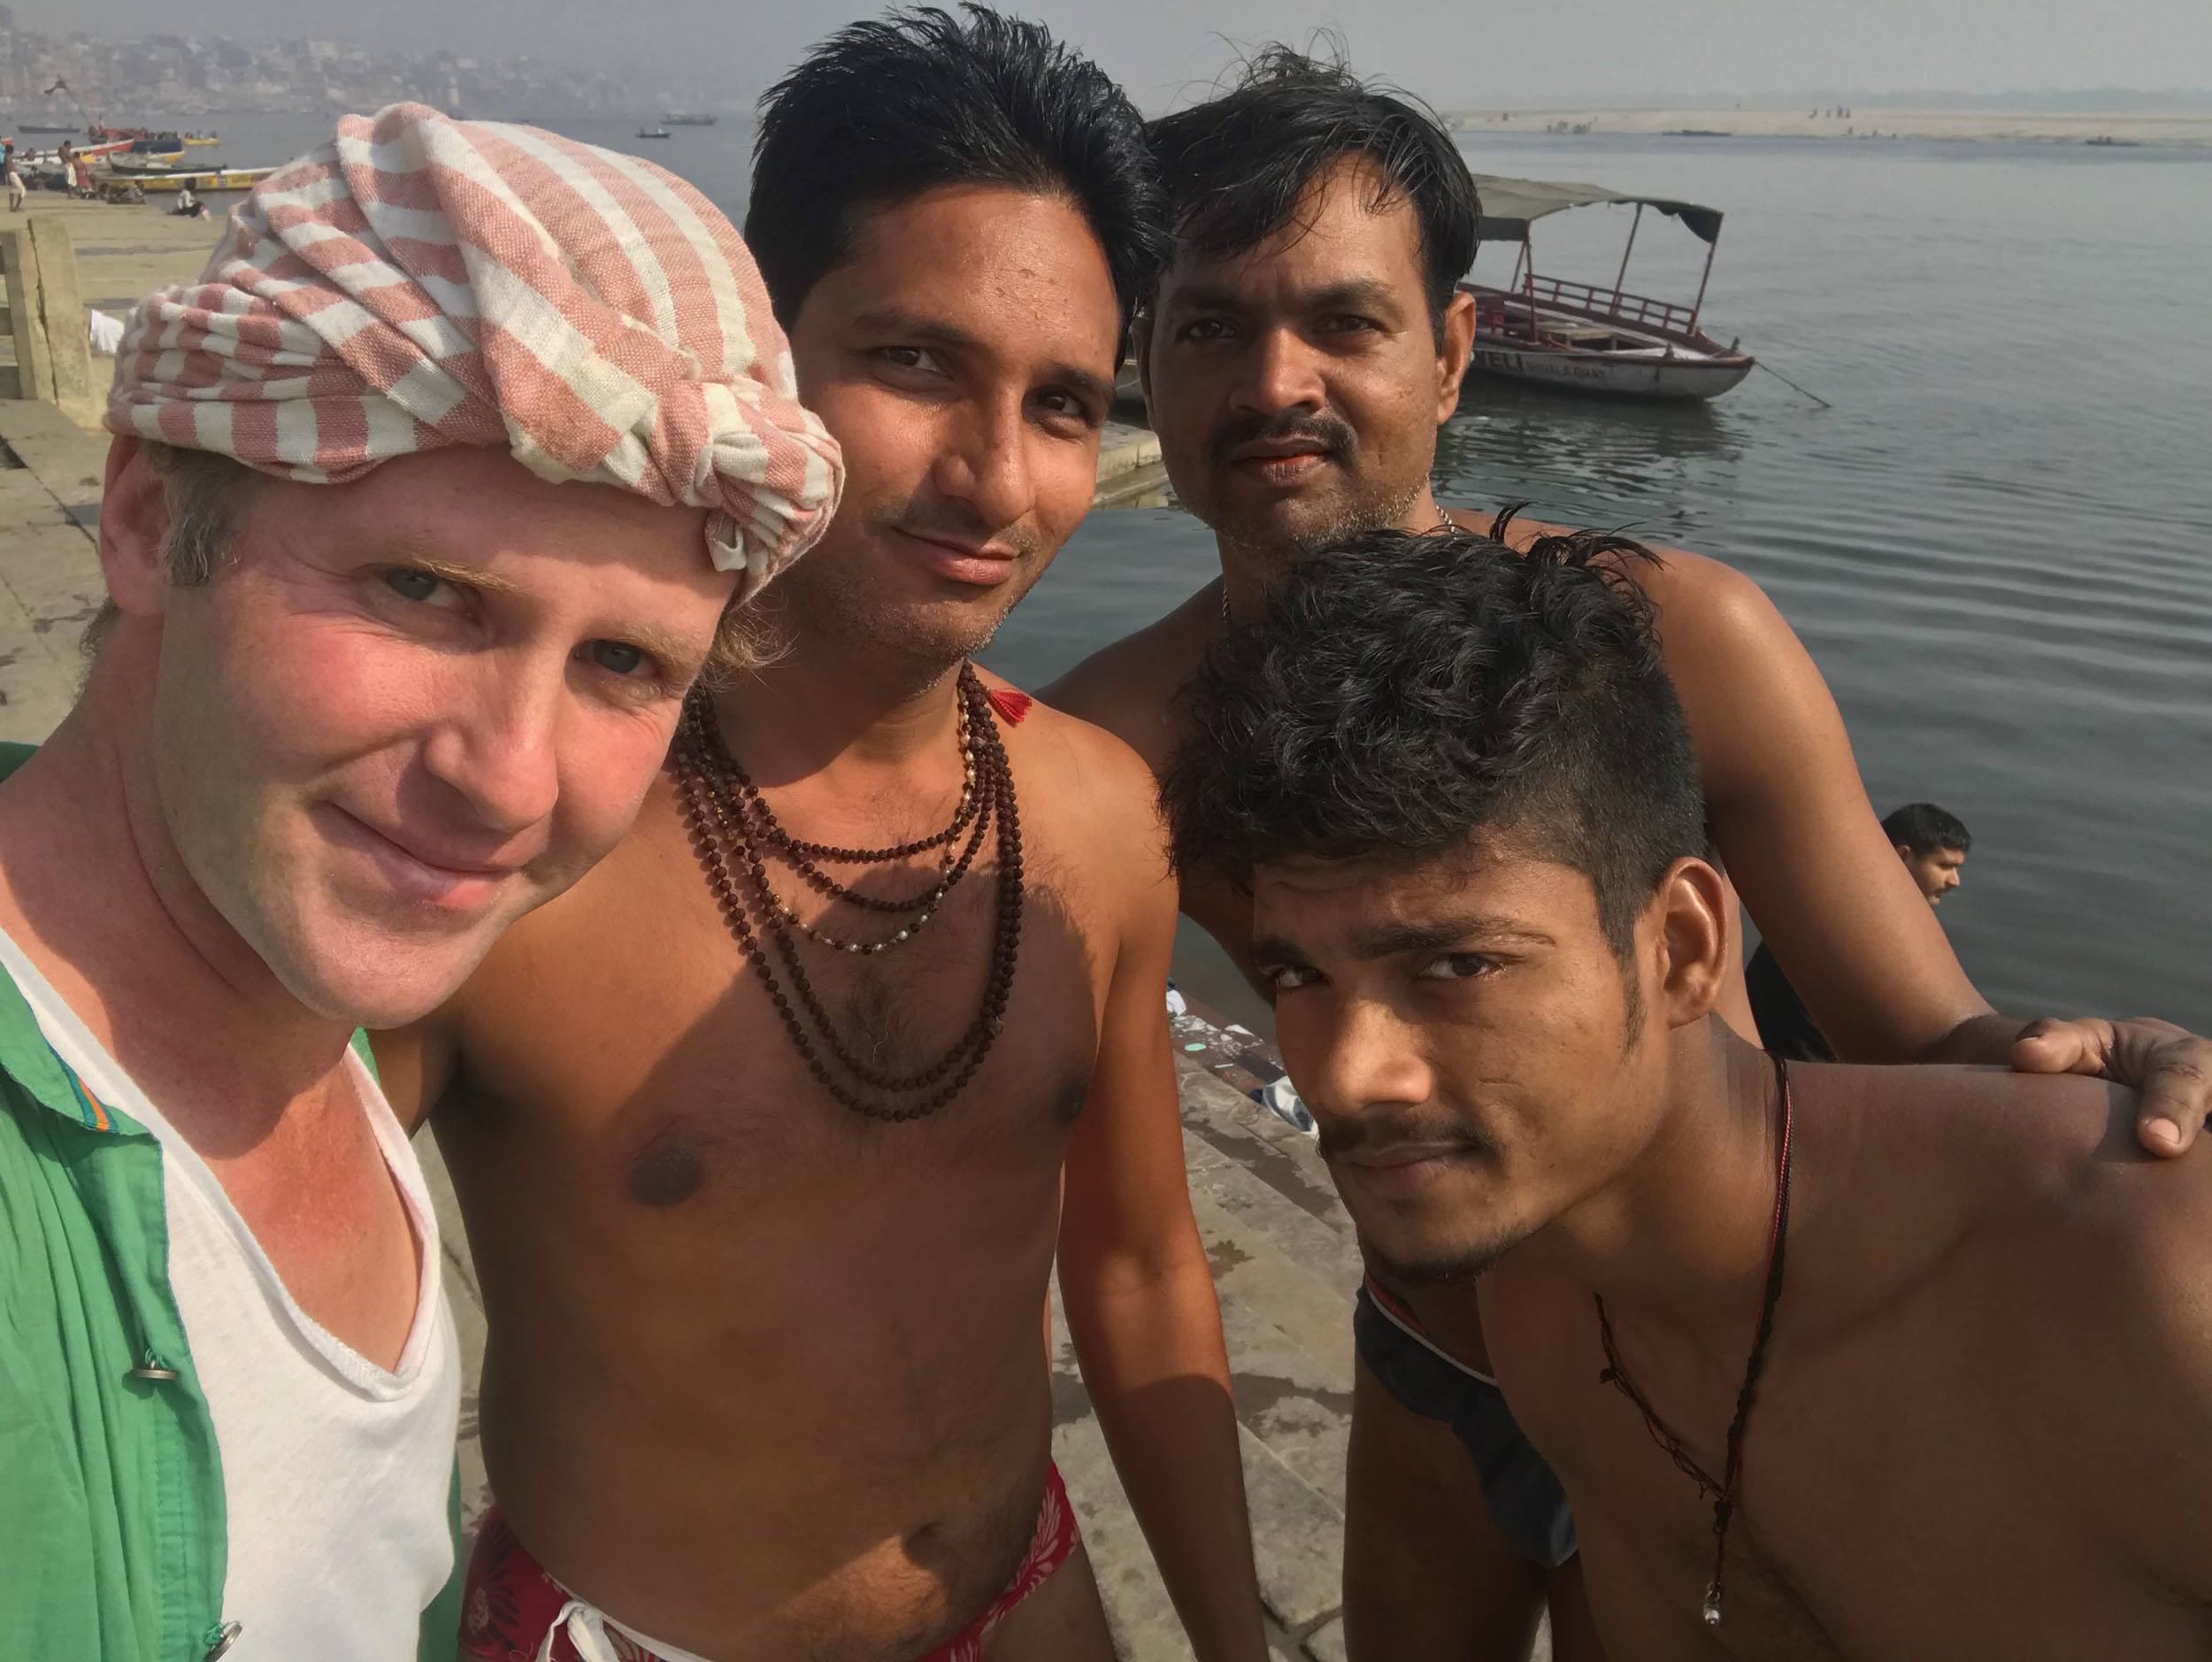 Ben with Indian men by the Ganges in Varanasi India